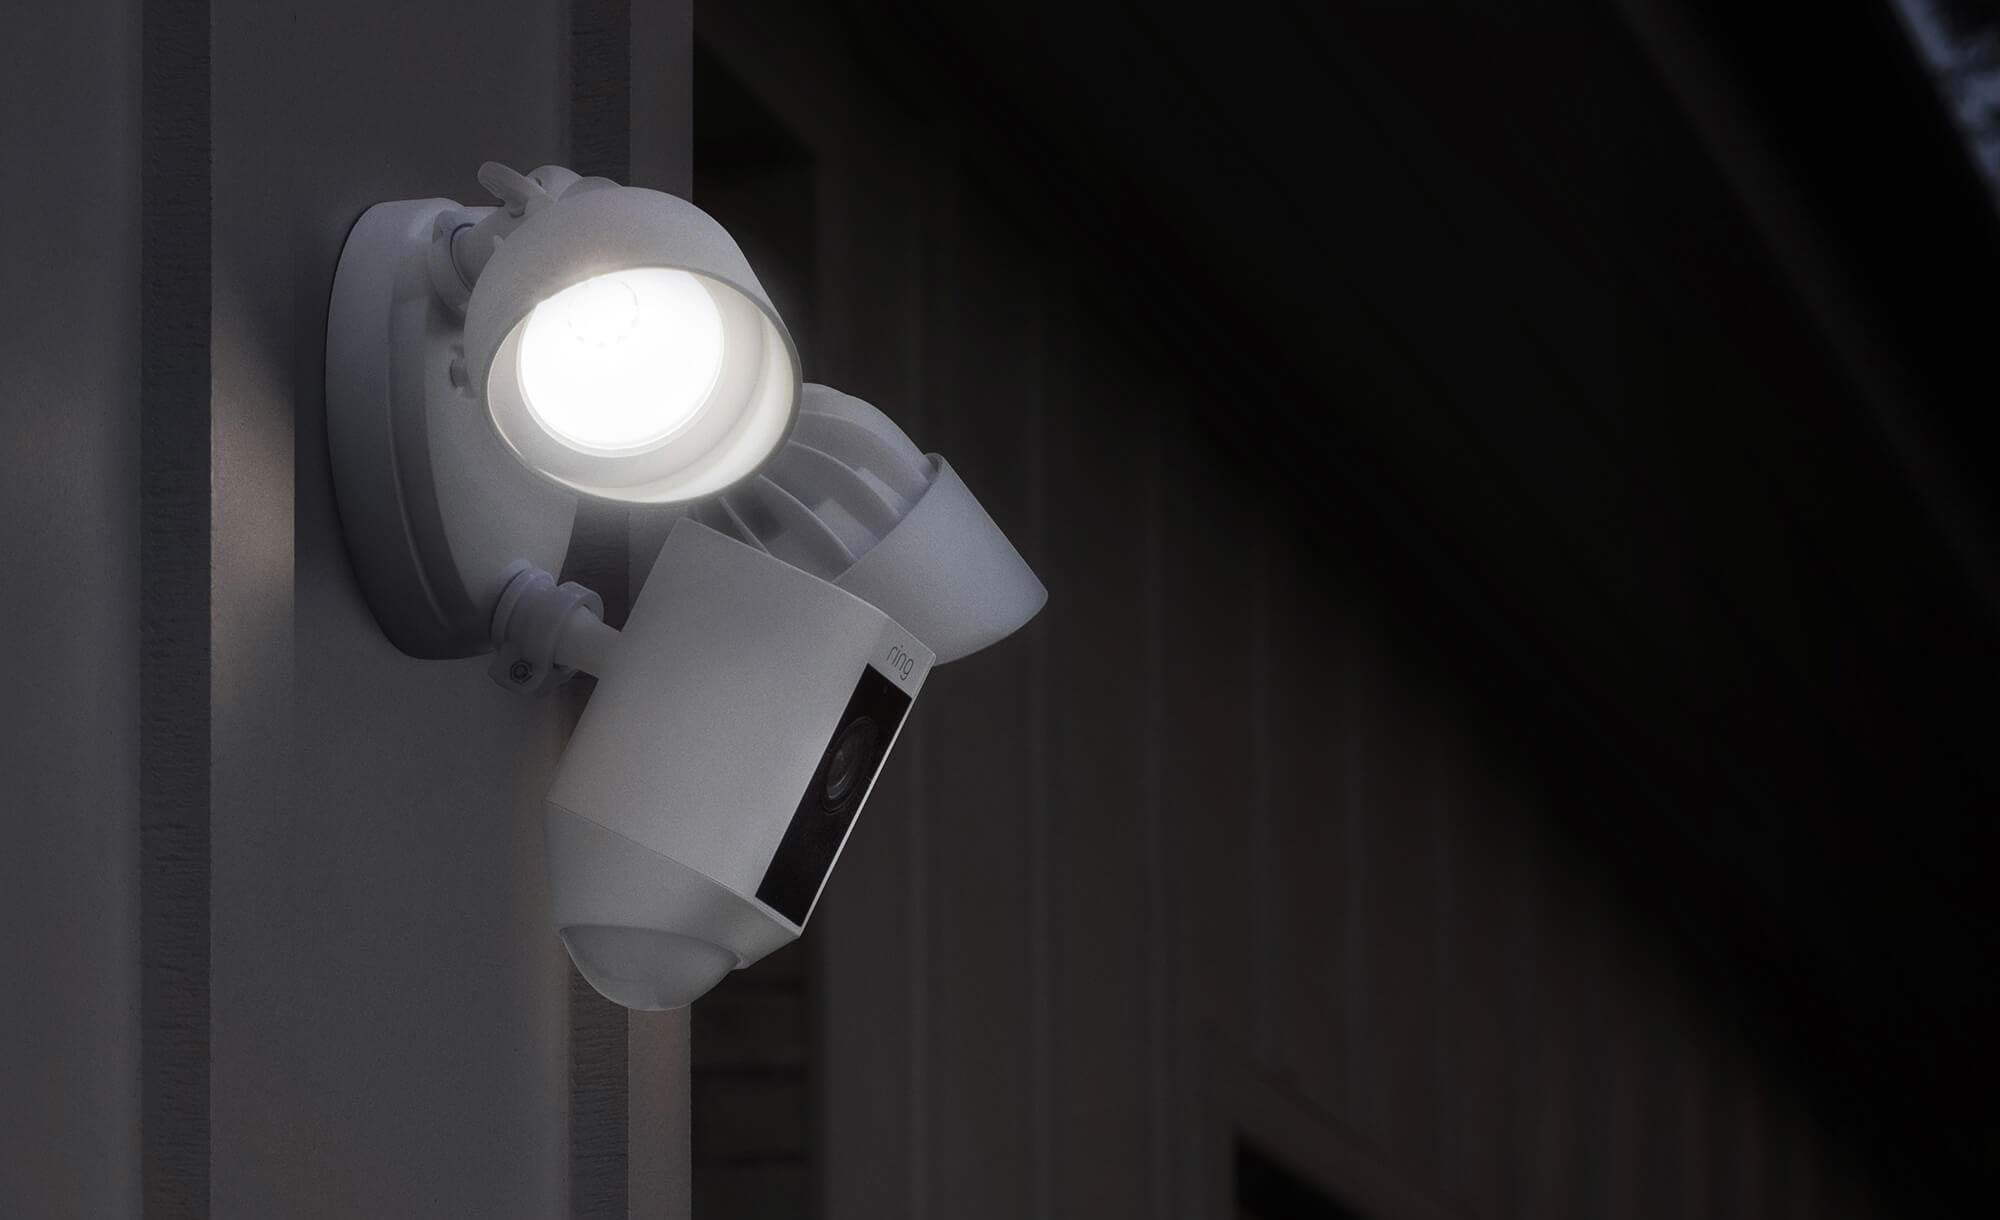 Ring Floodlight Cam Review The Home Security Device to Get Tom's Guide